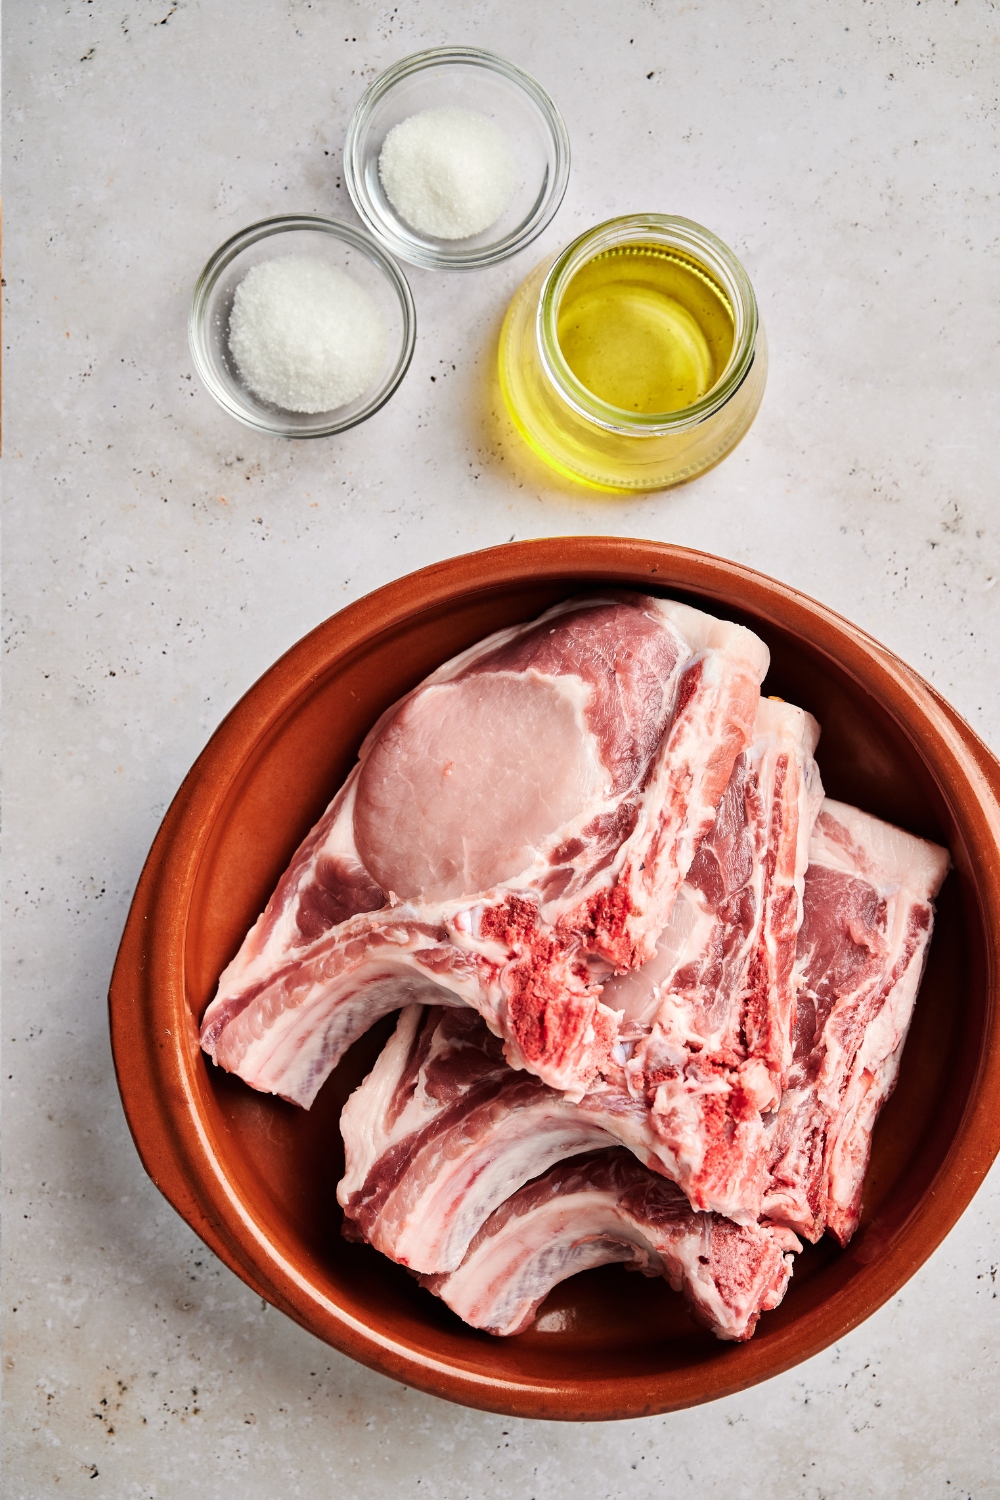 Pork chops sit in a large red bowl and smaller jars of salt, sugar, and oil are next to it.